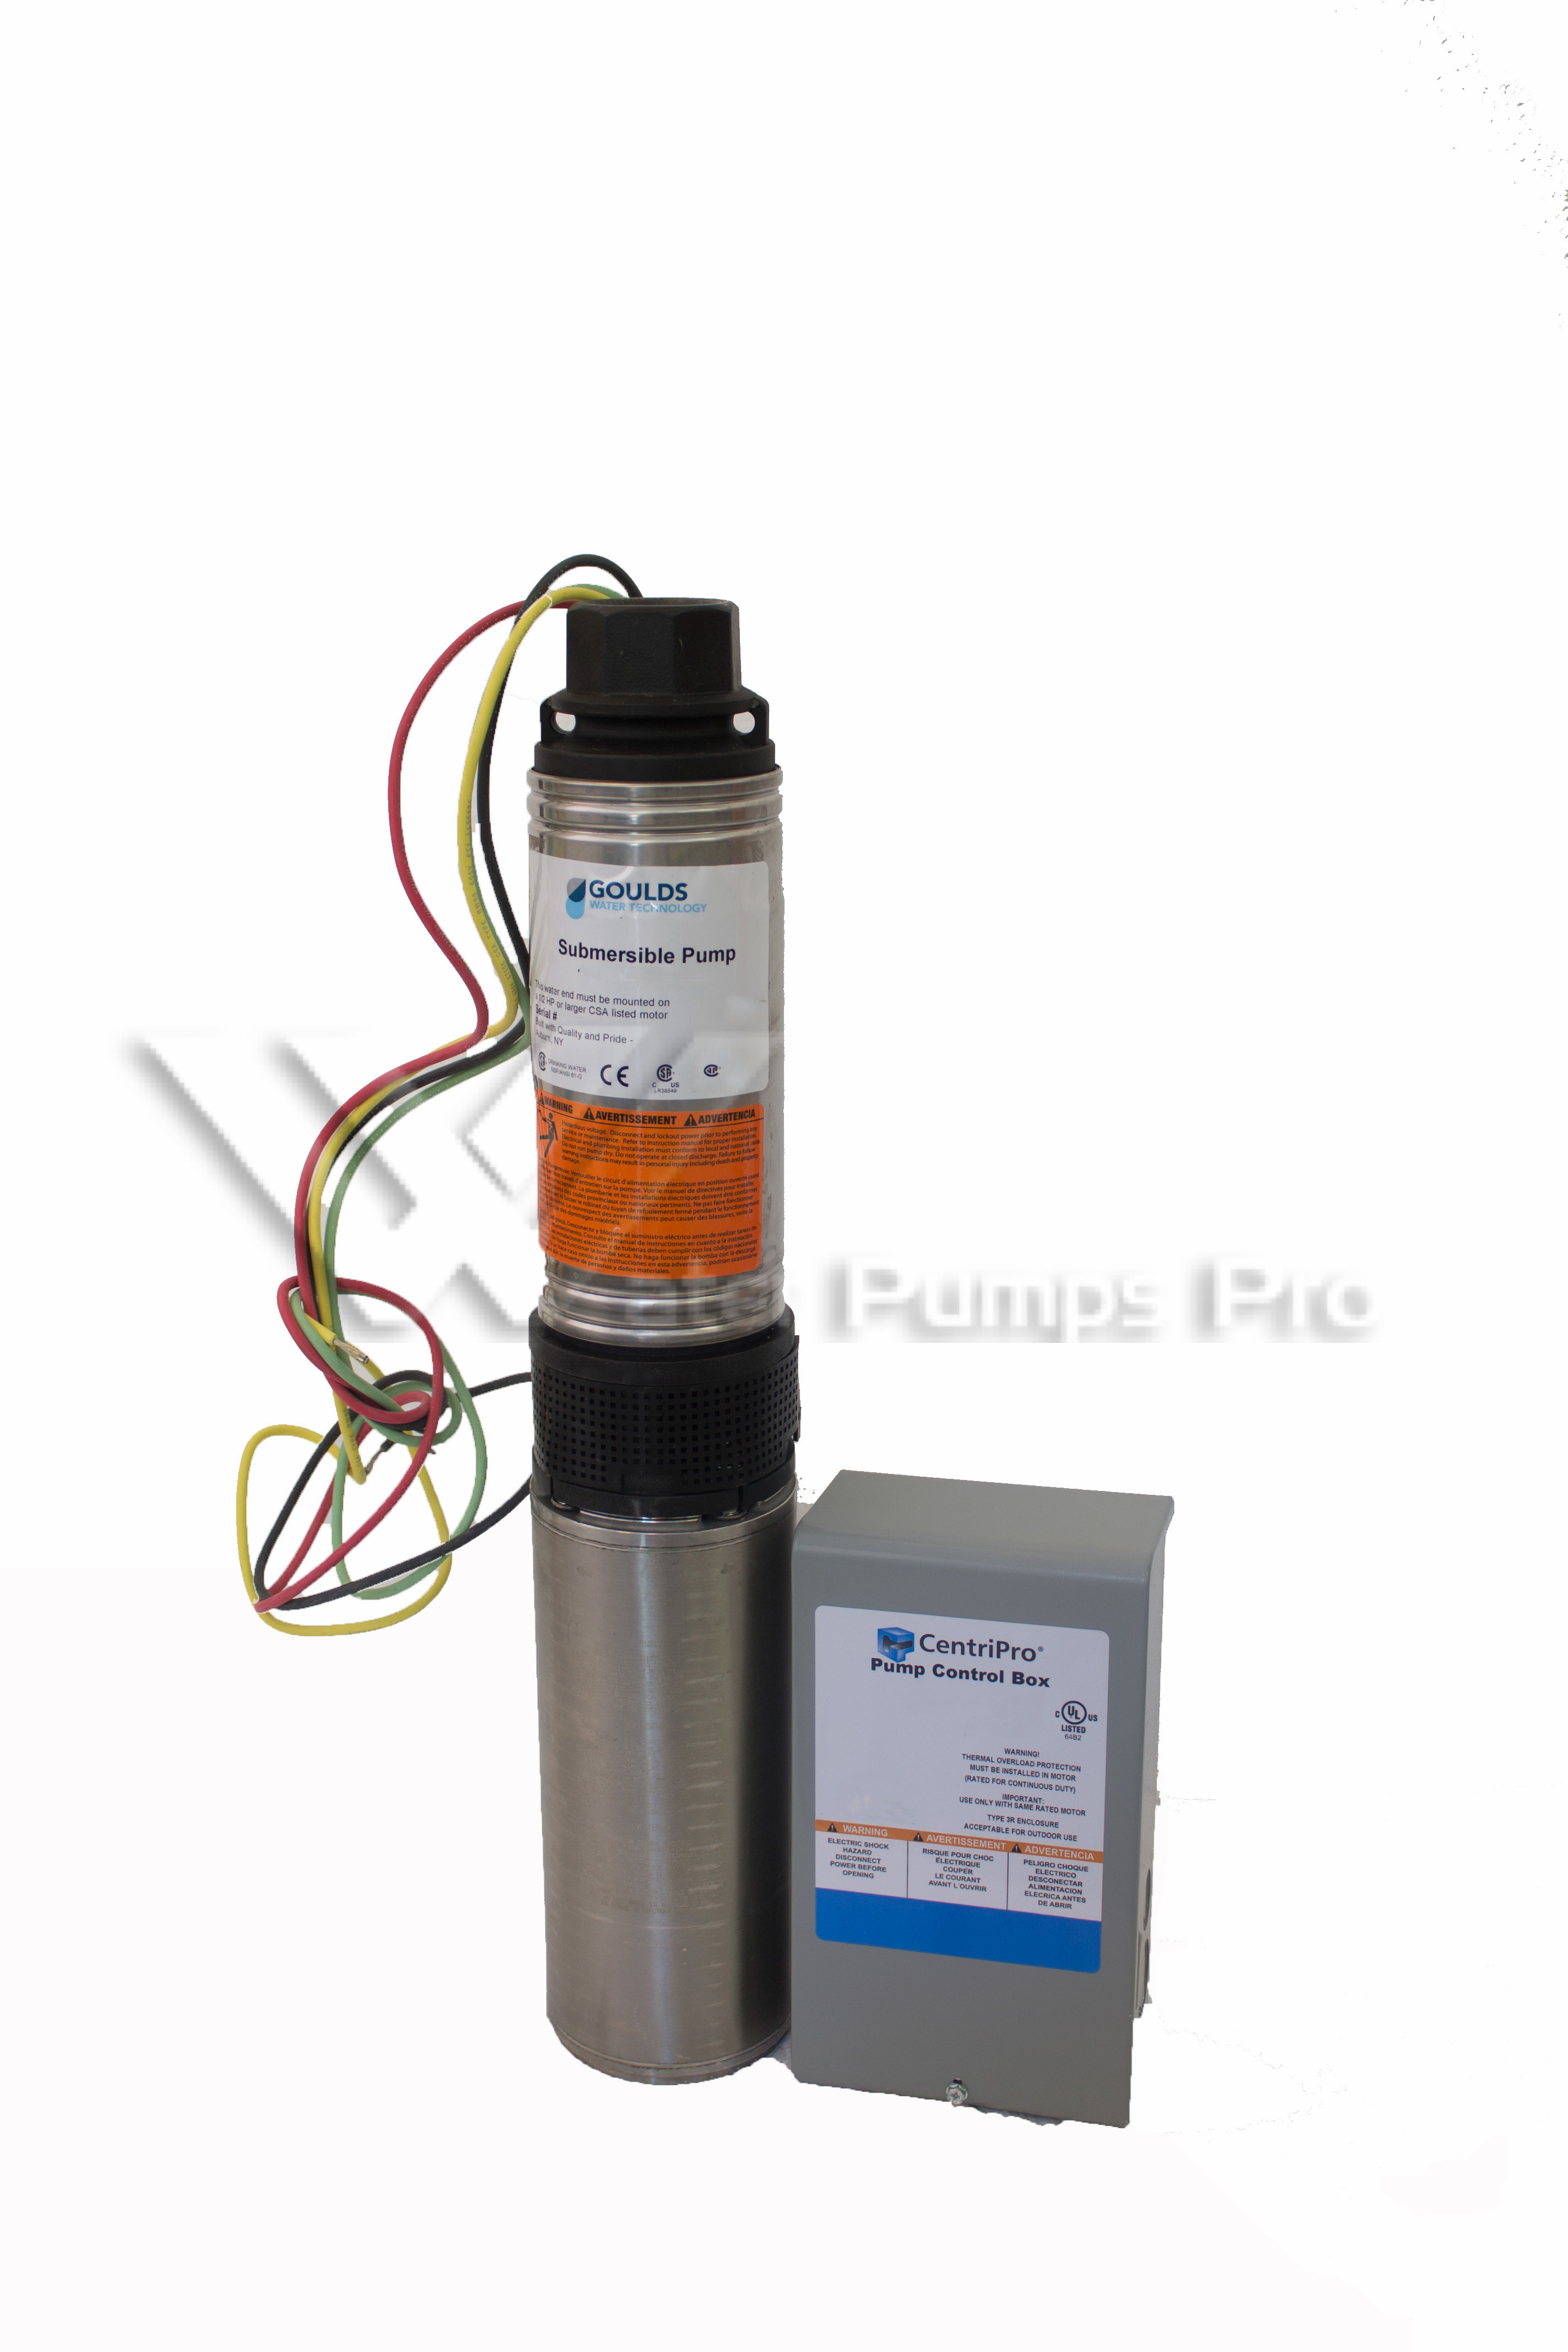 Goulds 5HS05412C Submersible Water Well Pump 1/2HP 230V 3Wire